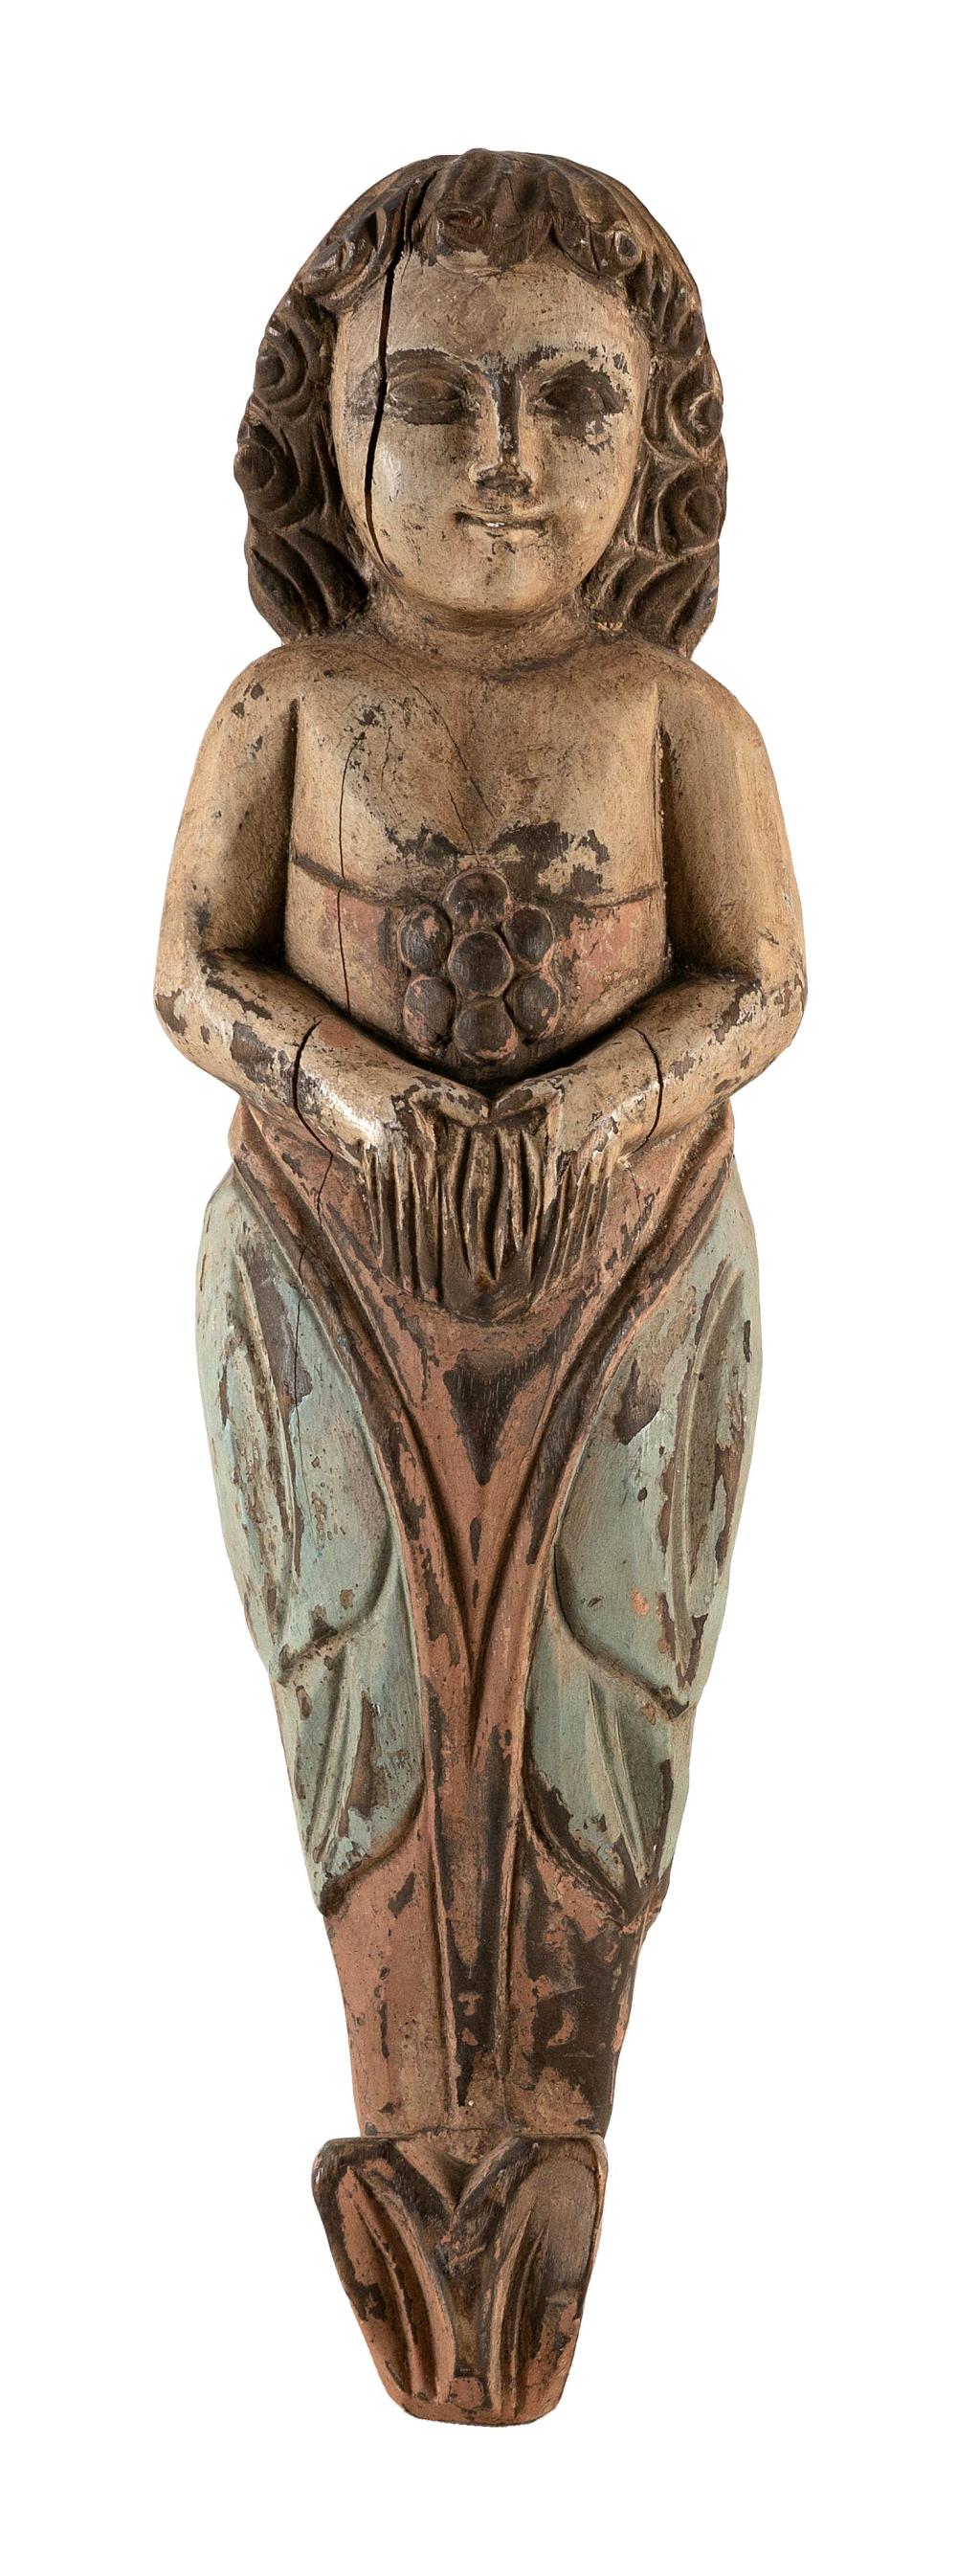 CARVED WOODEN MERMAID FIRST HALF 2f1369